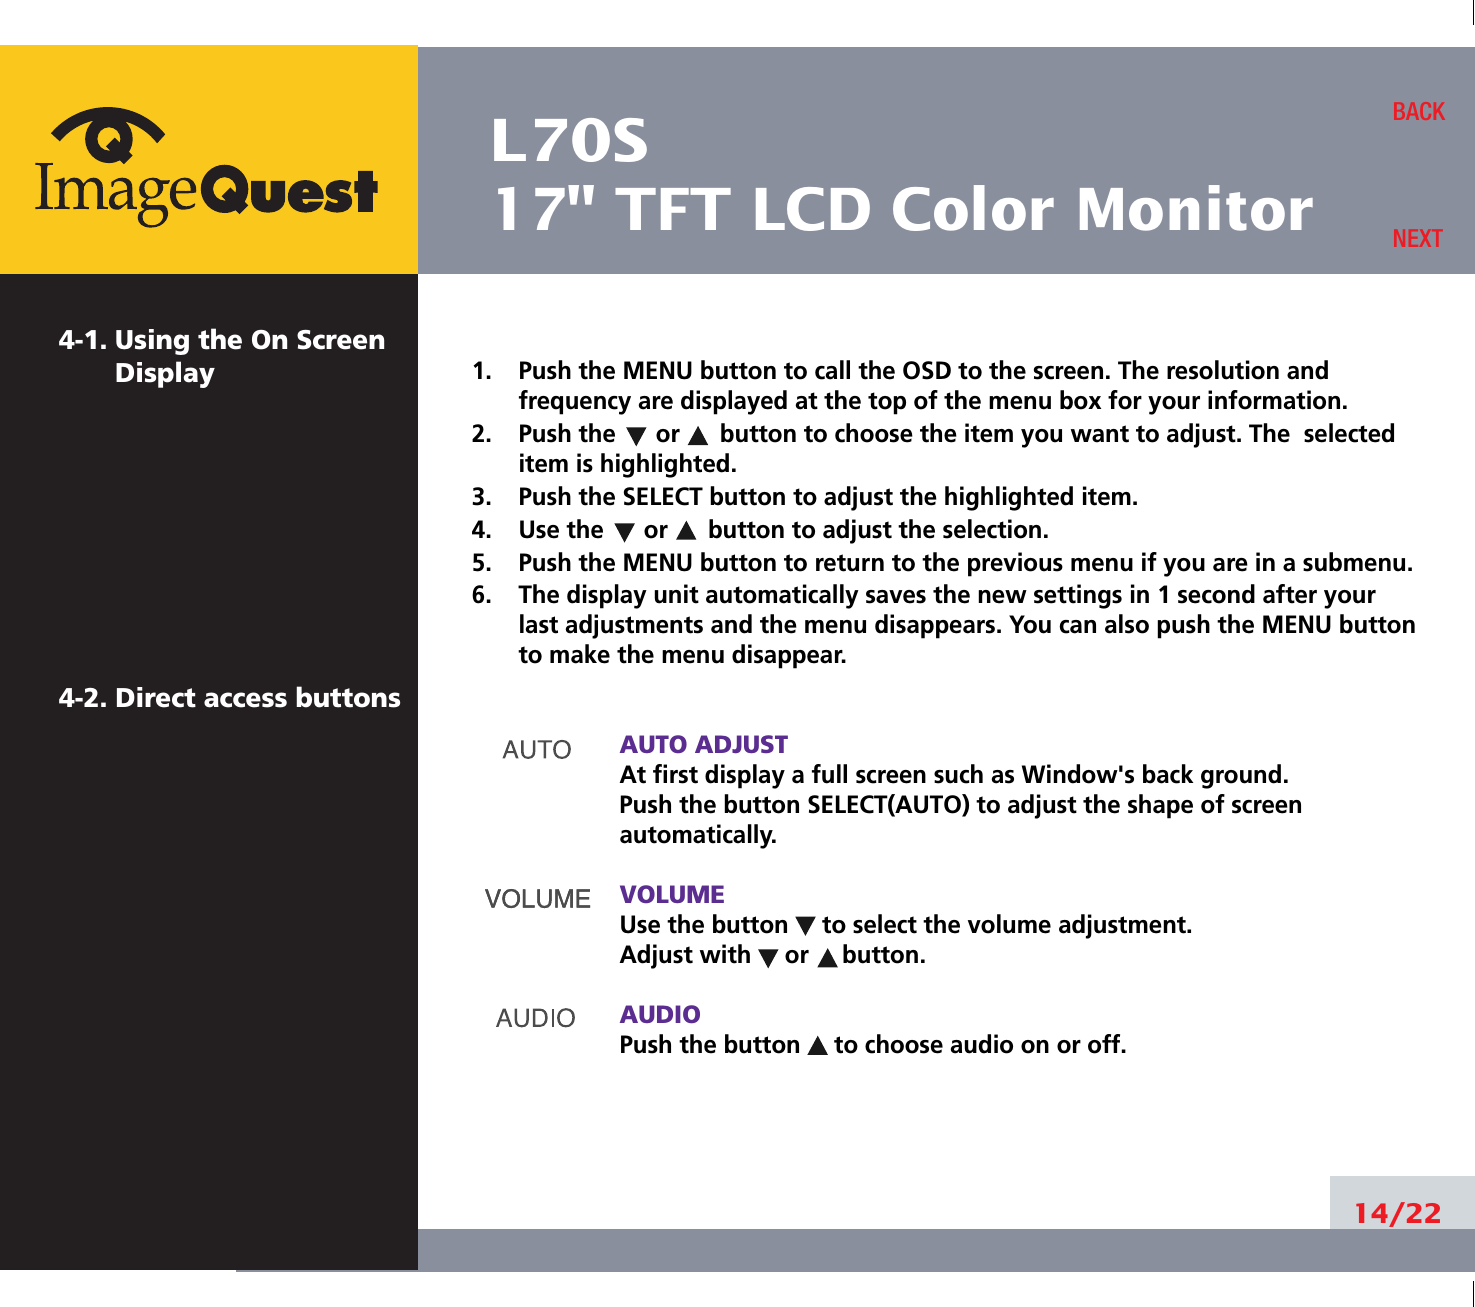 L70S17&quot; TFT LCD Color Monitor14/22BACKNEXT1.    Push the MENU button to call the OSD to the screen. The resolution andfrequency are displayed at the top of the menu box for your information.2.    Push the      or      button to choose the item you want to adjust. The  selecteditem is highlighted.3.    Push the SELECT button to adjust the highlighted item. 4.    Use the      or      button to adjust the selection.5.    Push the MENU button to return to the previous menu if you are in a submenu.6.    The display unit automatically saves the new settings in 1 second after yourlast adjustments and the menu disappears. You can also push the MENU buttonto make the menu disappear.AUTO ADJUSTAt first display a full screen such as Window&apos;s back ground.Push the button SELECT(AUTO) to adjust the shape of screenautomatically.VOLUMEUse the button     to select the volume adjustment.Adjust with     or     button.AUDIOPush the button     to choose audio on or off.4-1. Using the On ScreenDisplay 4-2. Direct access buttons